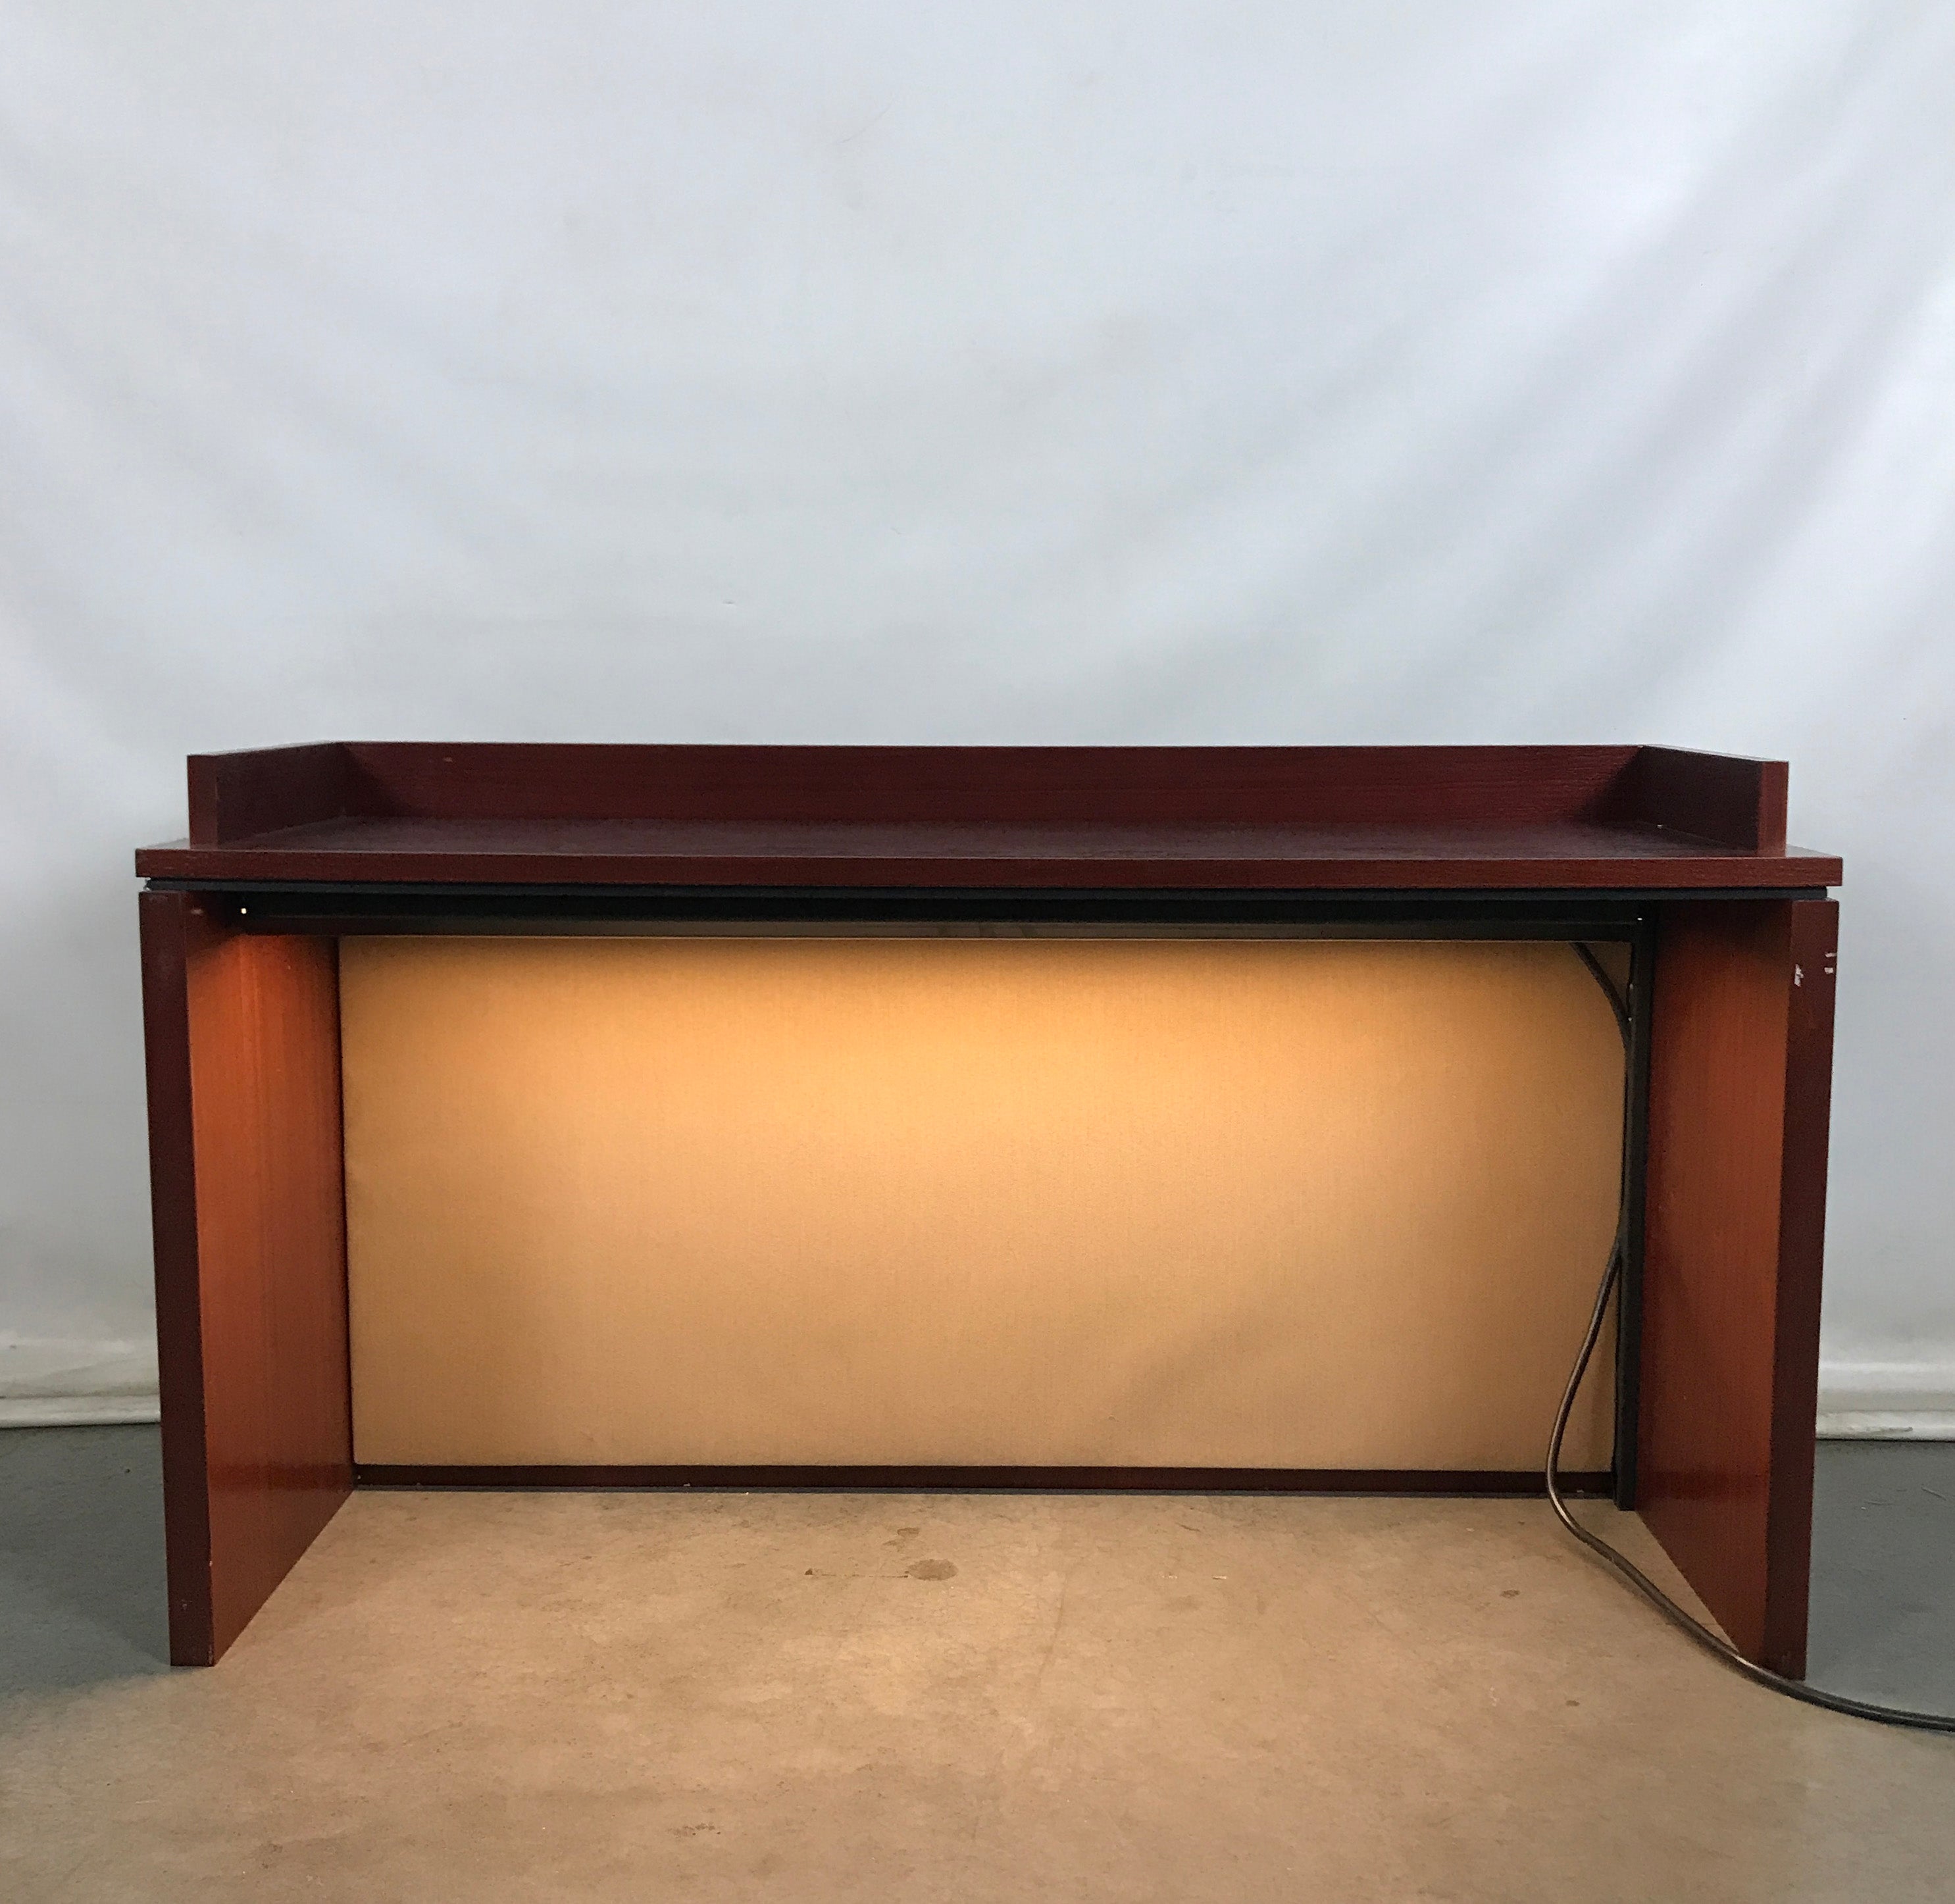 Dark Red Wooden Hutch with Light Panel